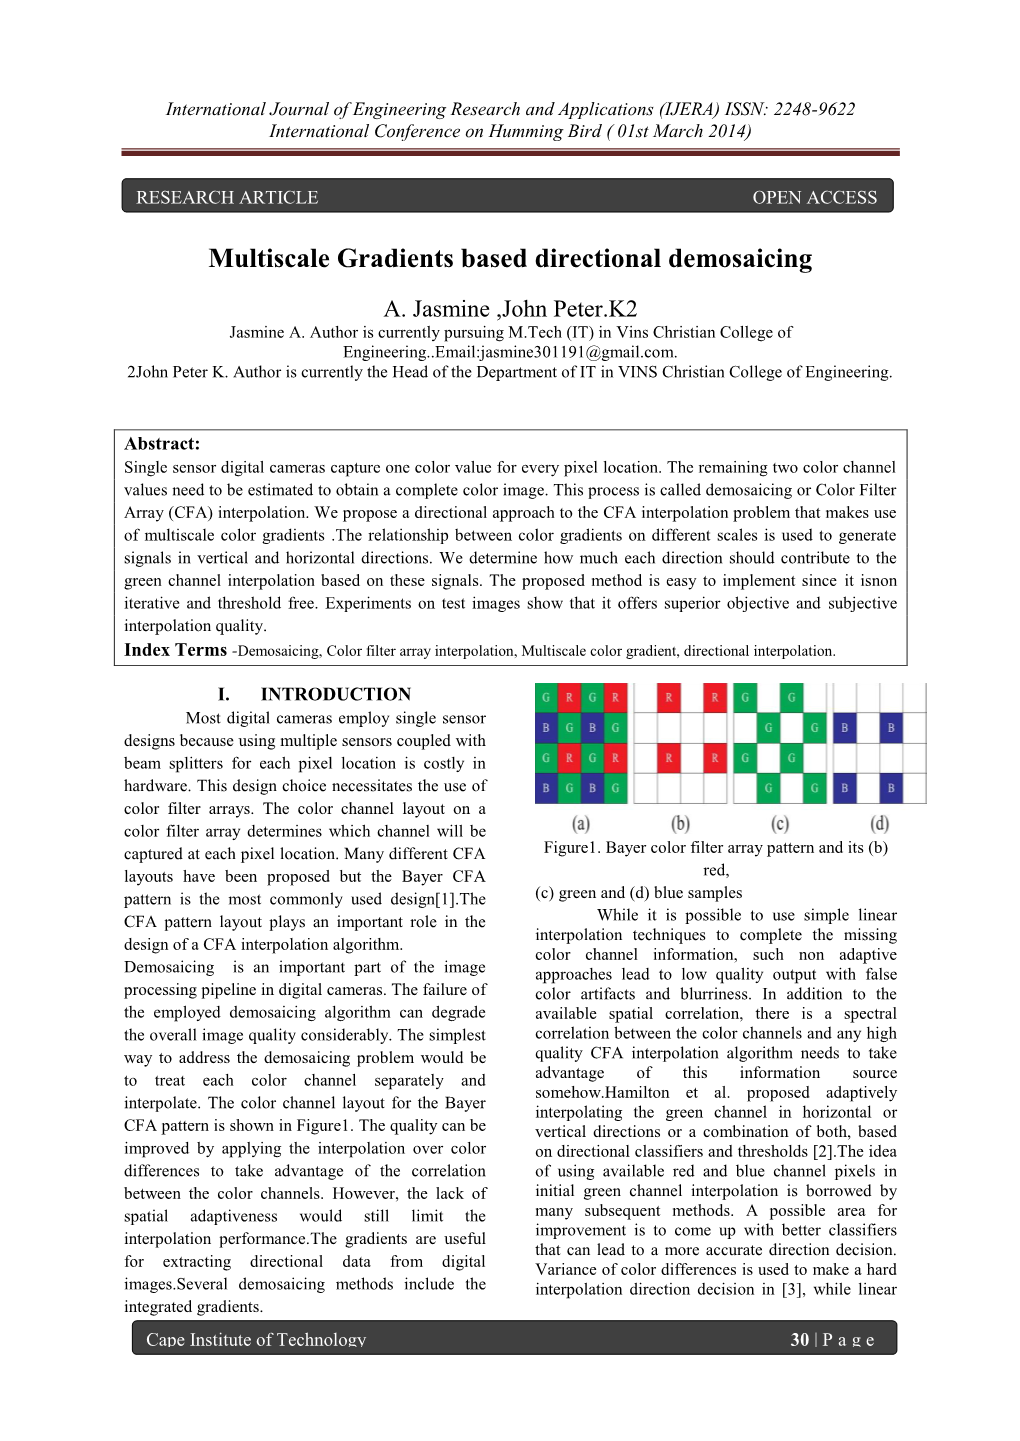 Multiscale Gradients Based Directional Demosaicing